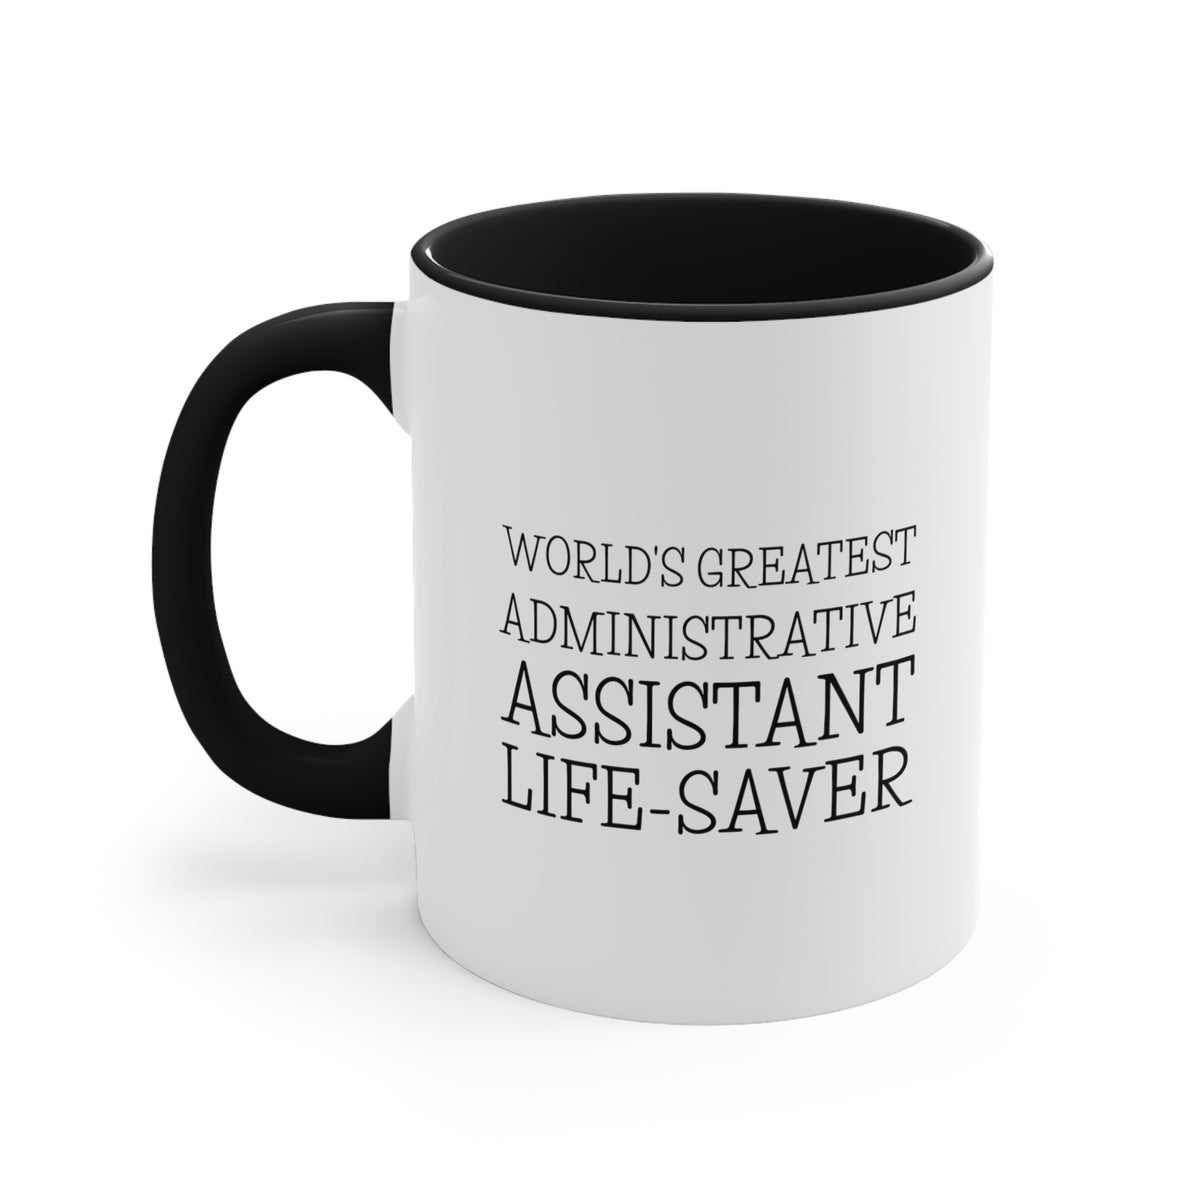 Administrative Assistant Gifts - World's Greatest Administrative Assistant - Admin Assistant Two Tone Mug For Women Men